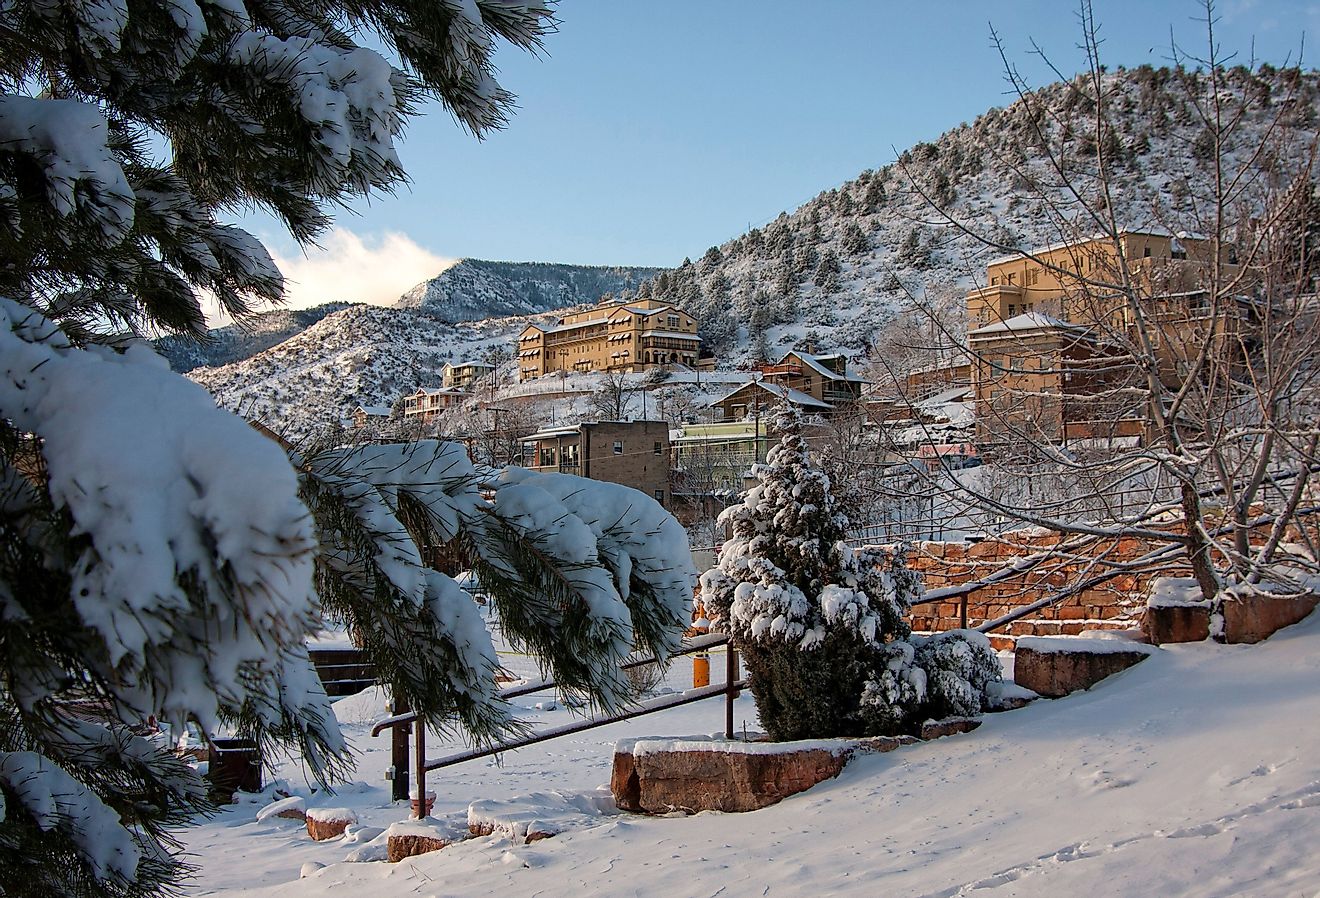 The morning after a good snow storm in Jerome, Arizona.